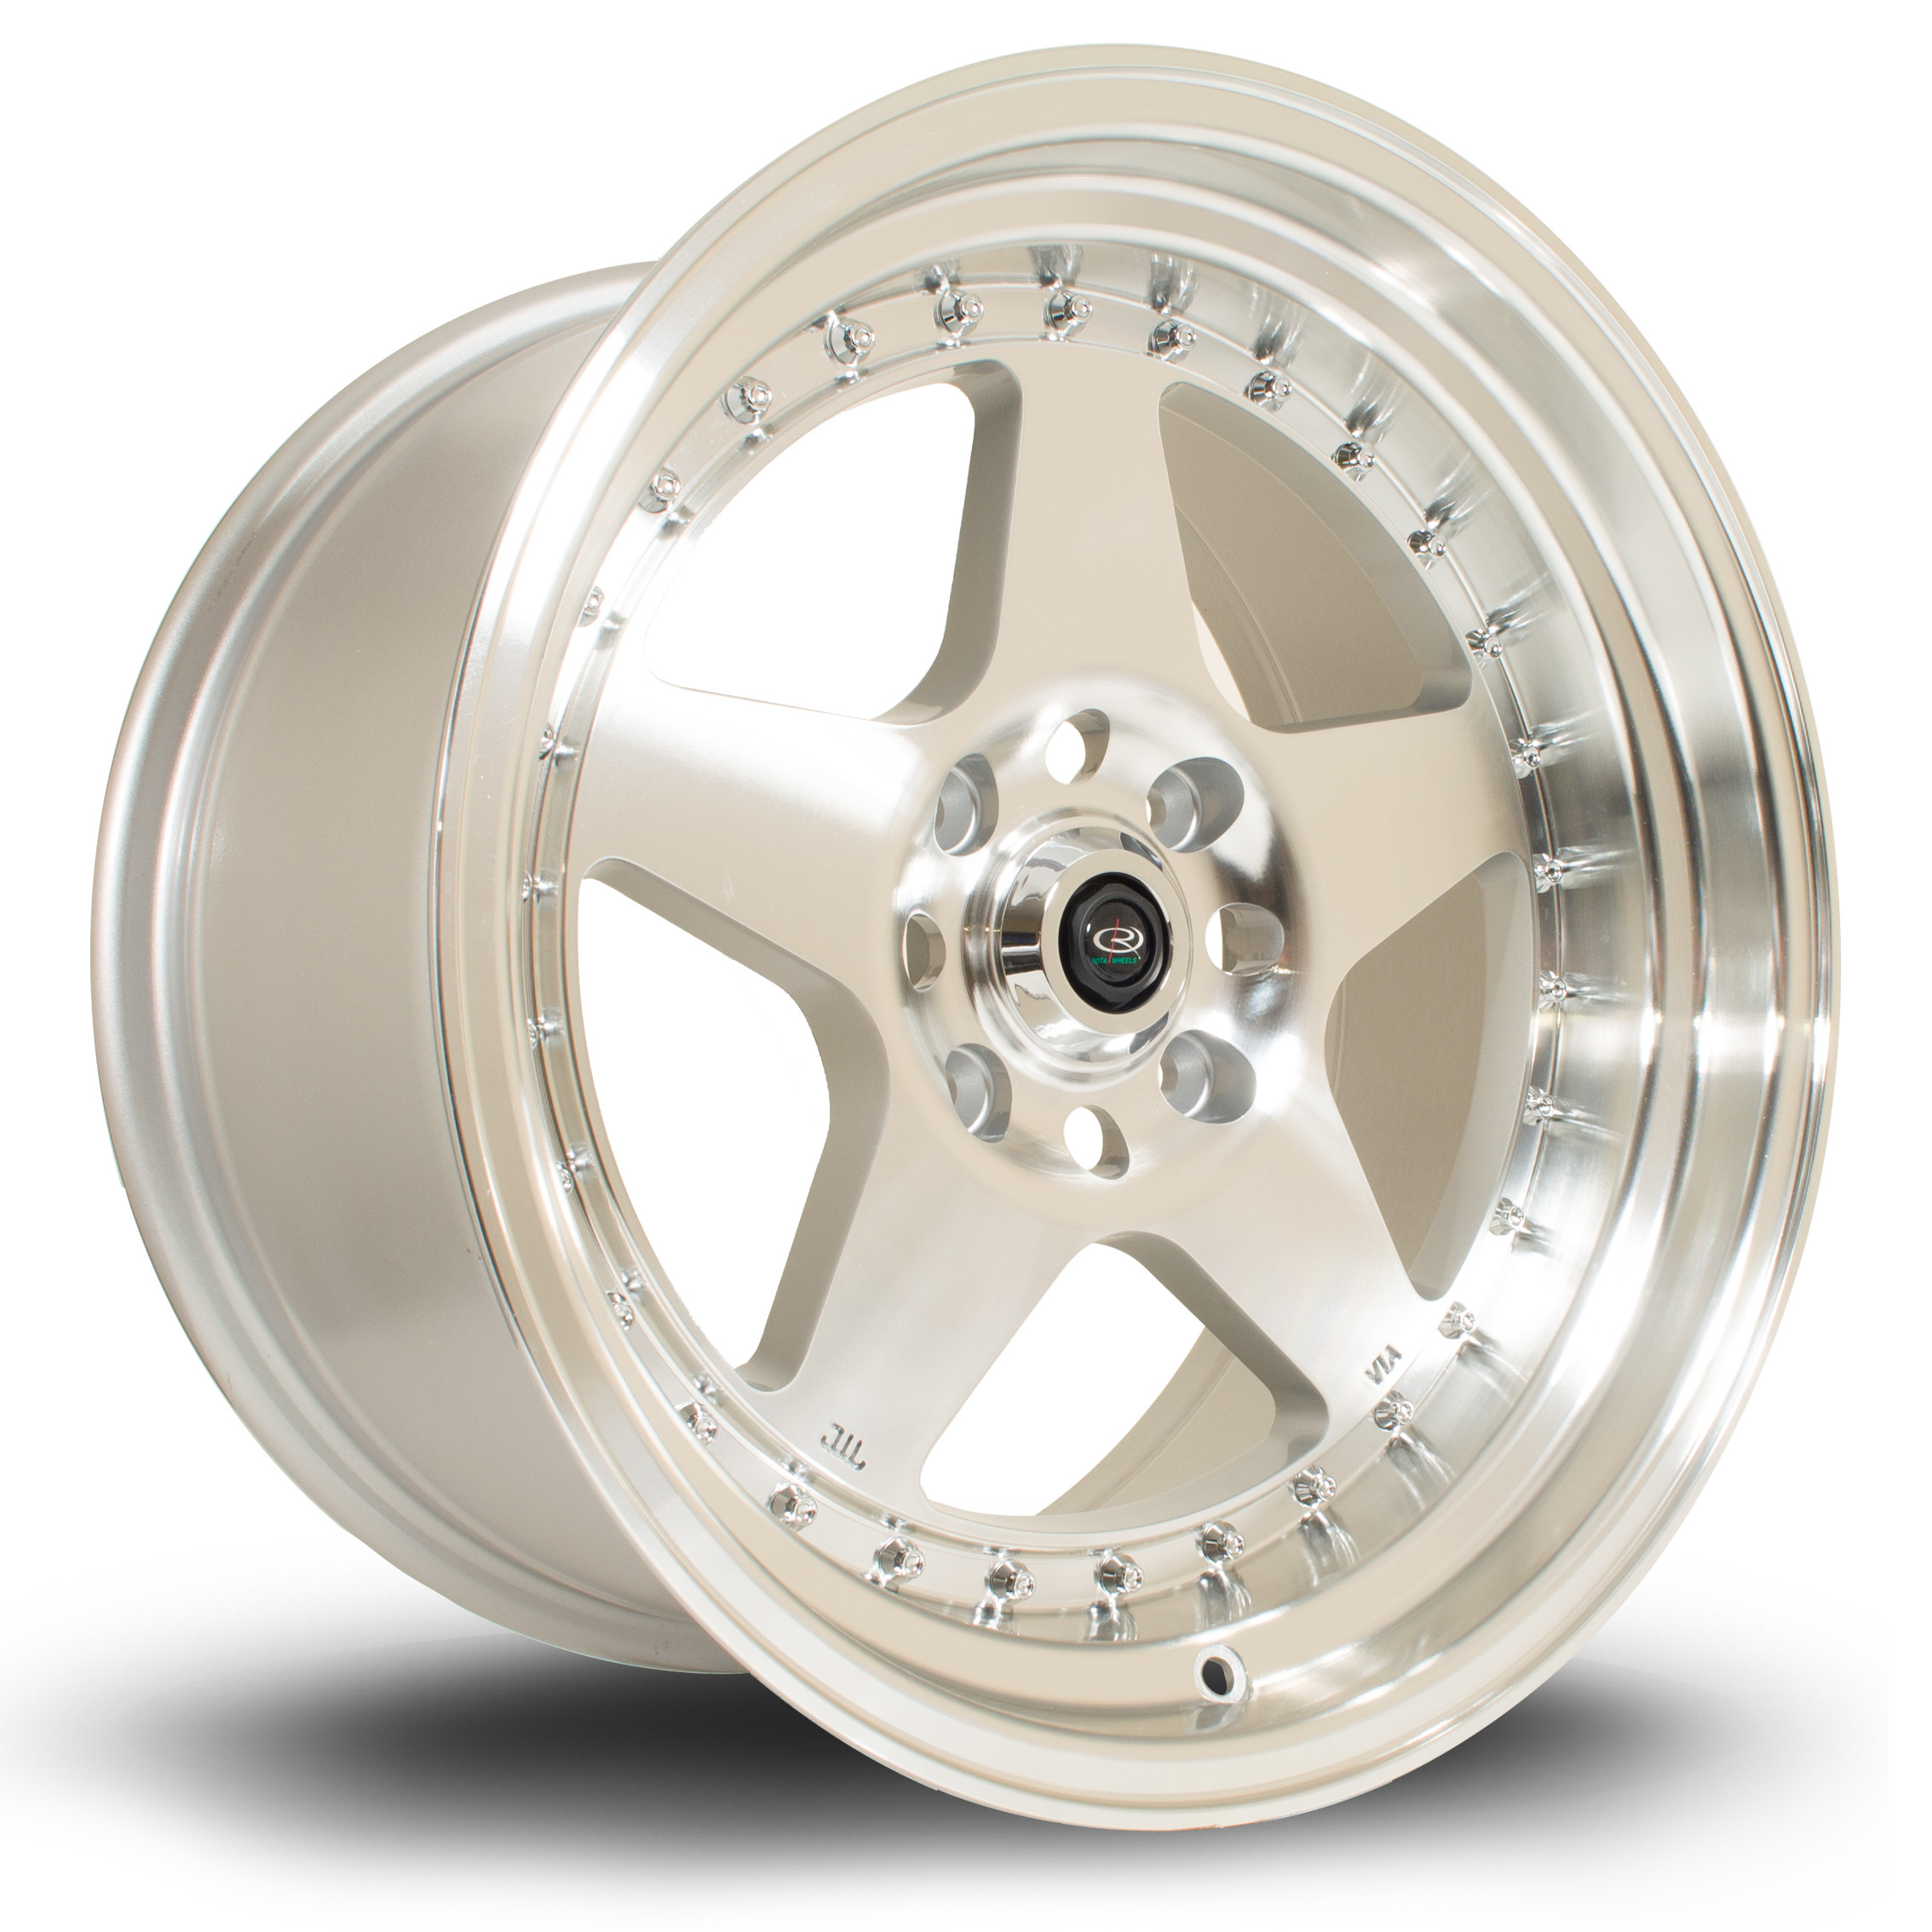 Kyusha 17x9 5x120 ET20 Silver with Polished Face